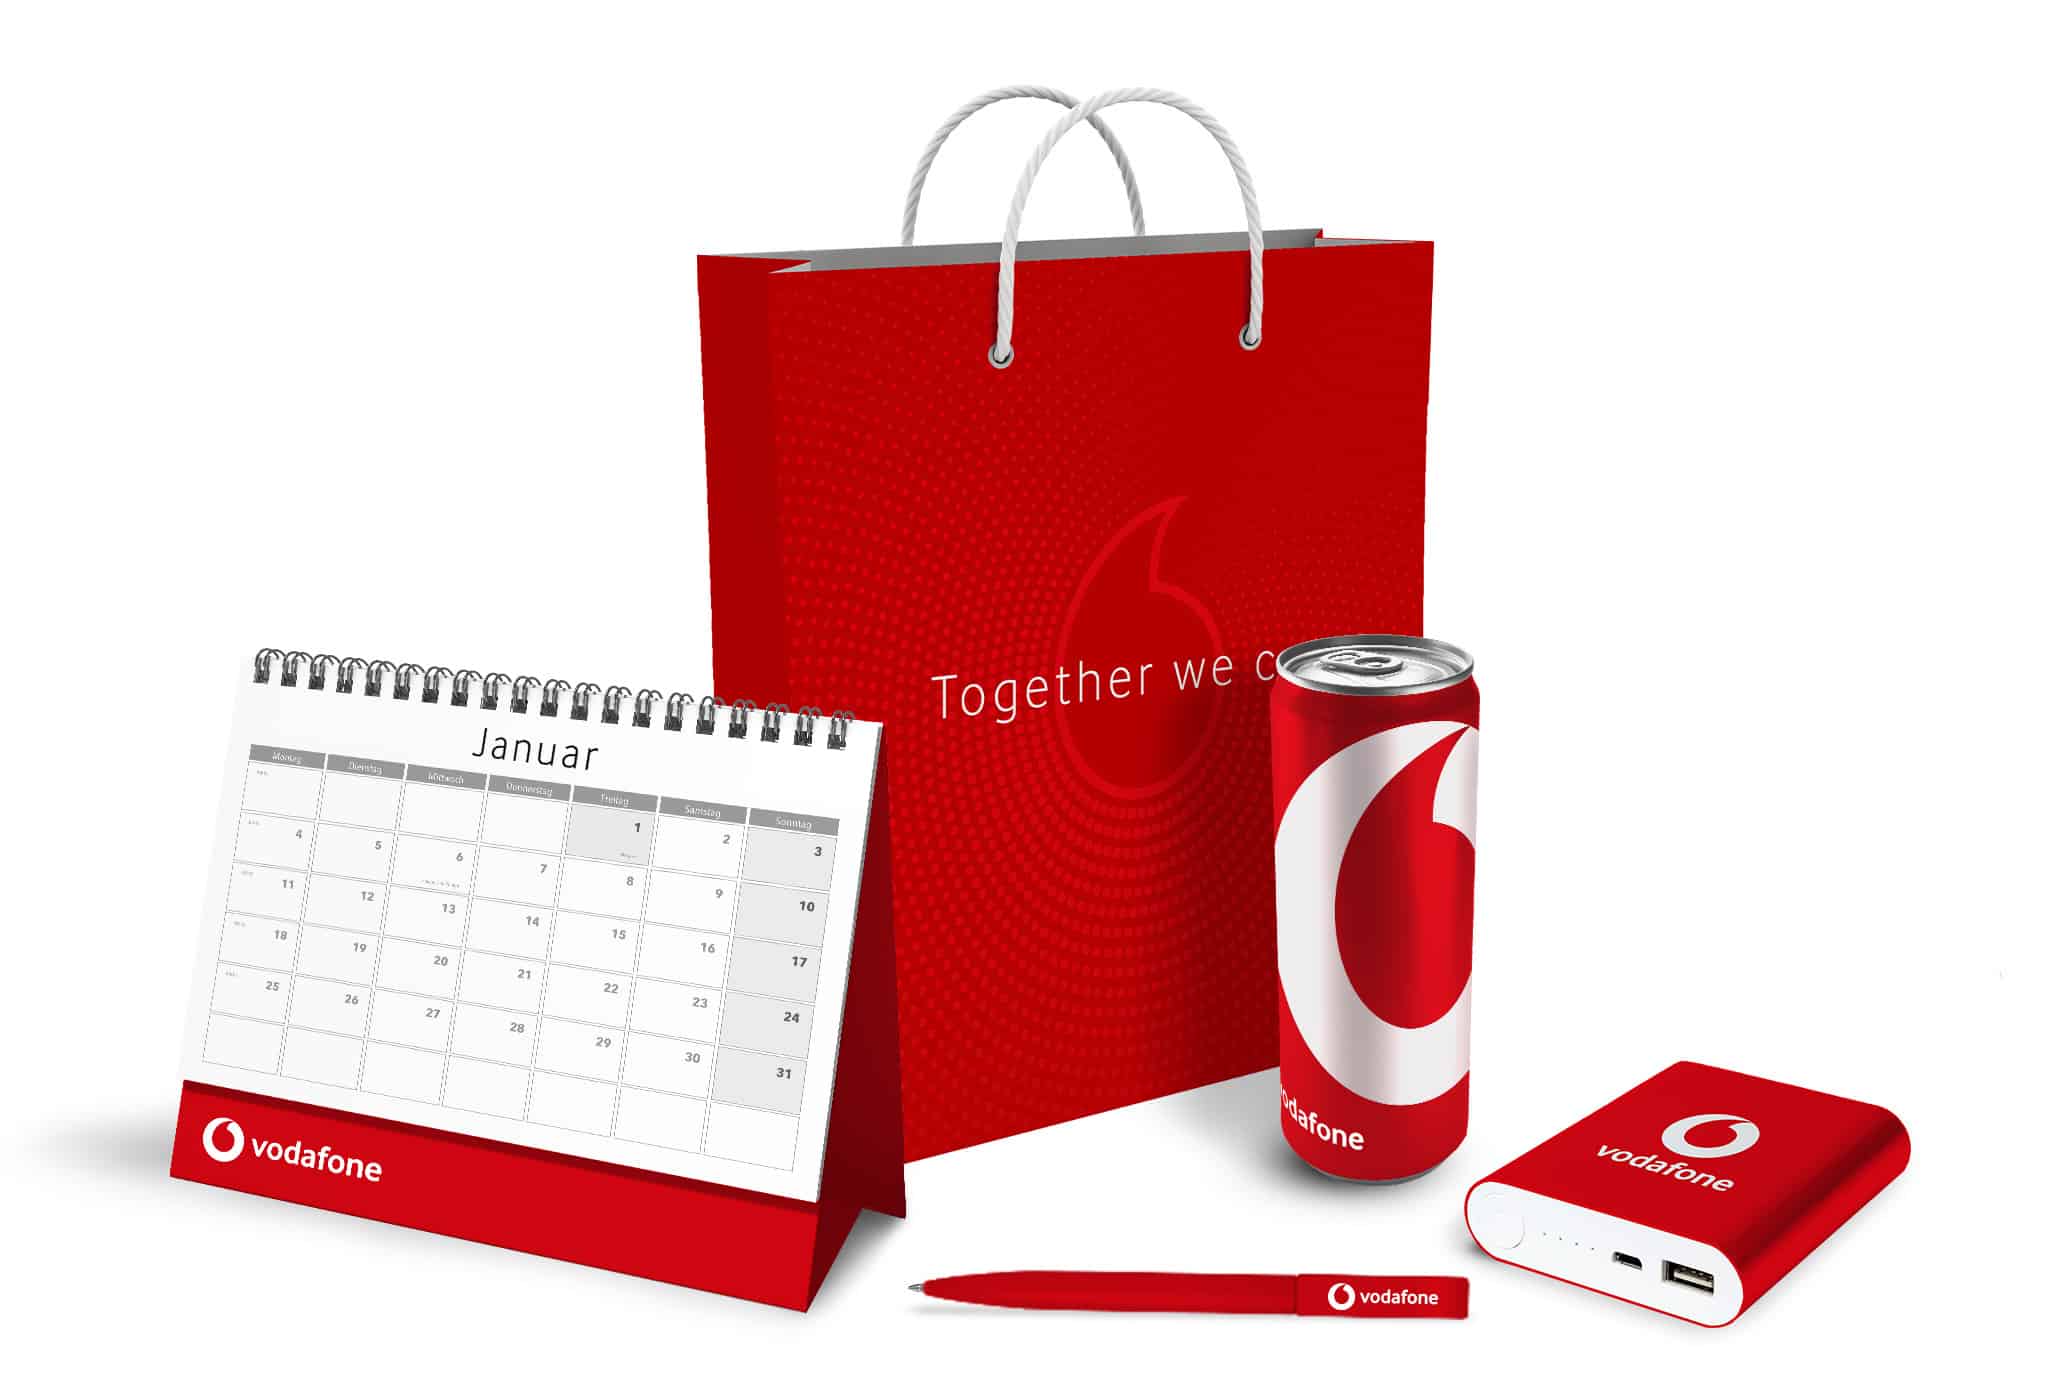 Own advertising material for company events